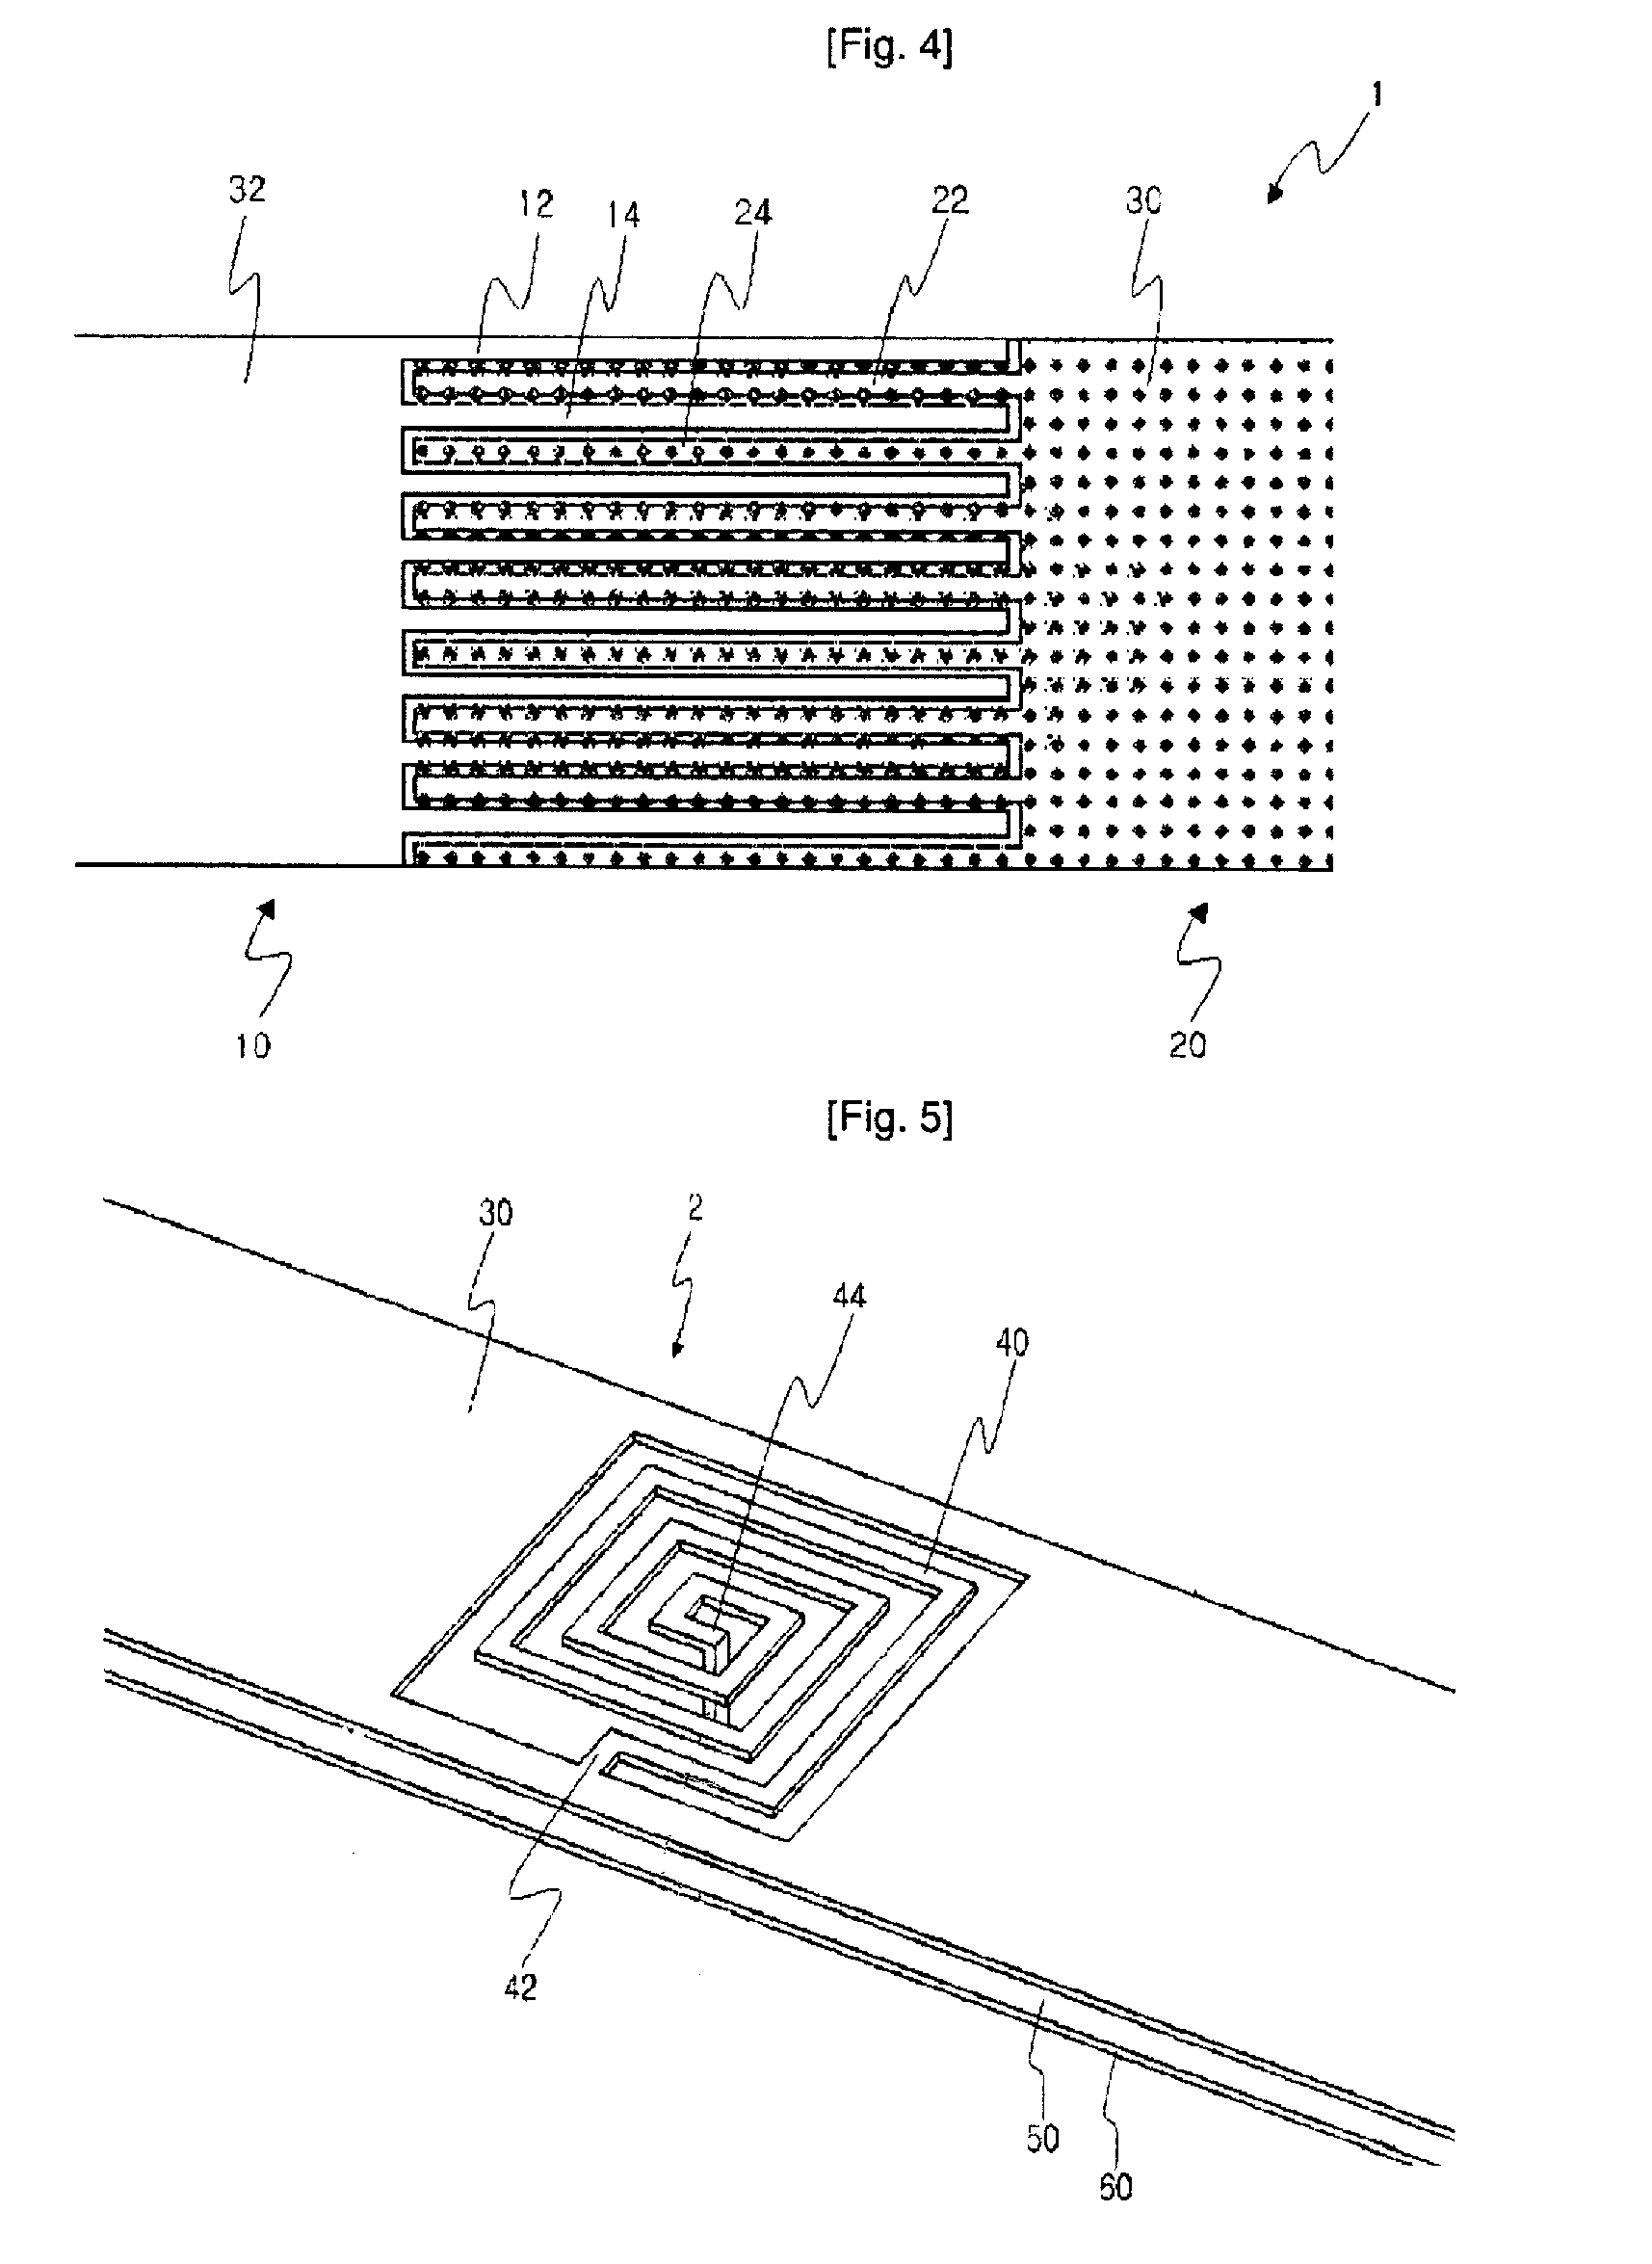 Transmission line with left-hand characteristics including an interdigital capacitor with partially overlapping fingers